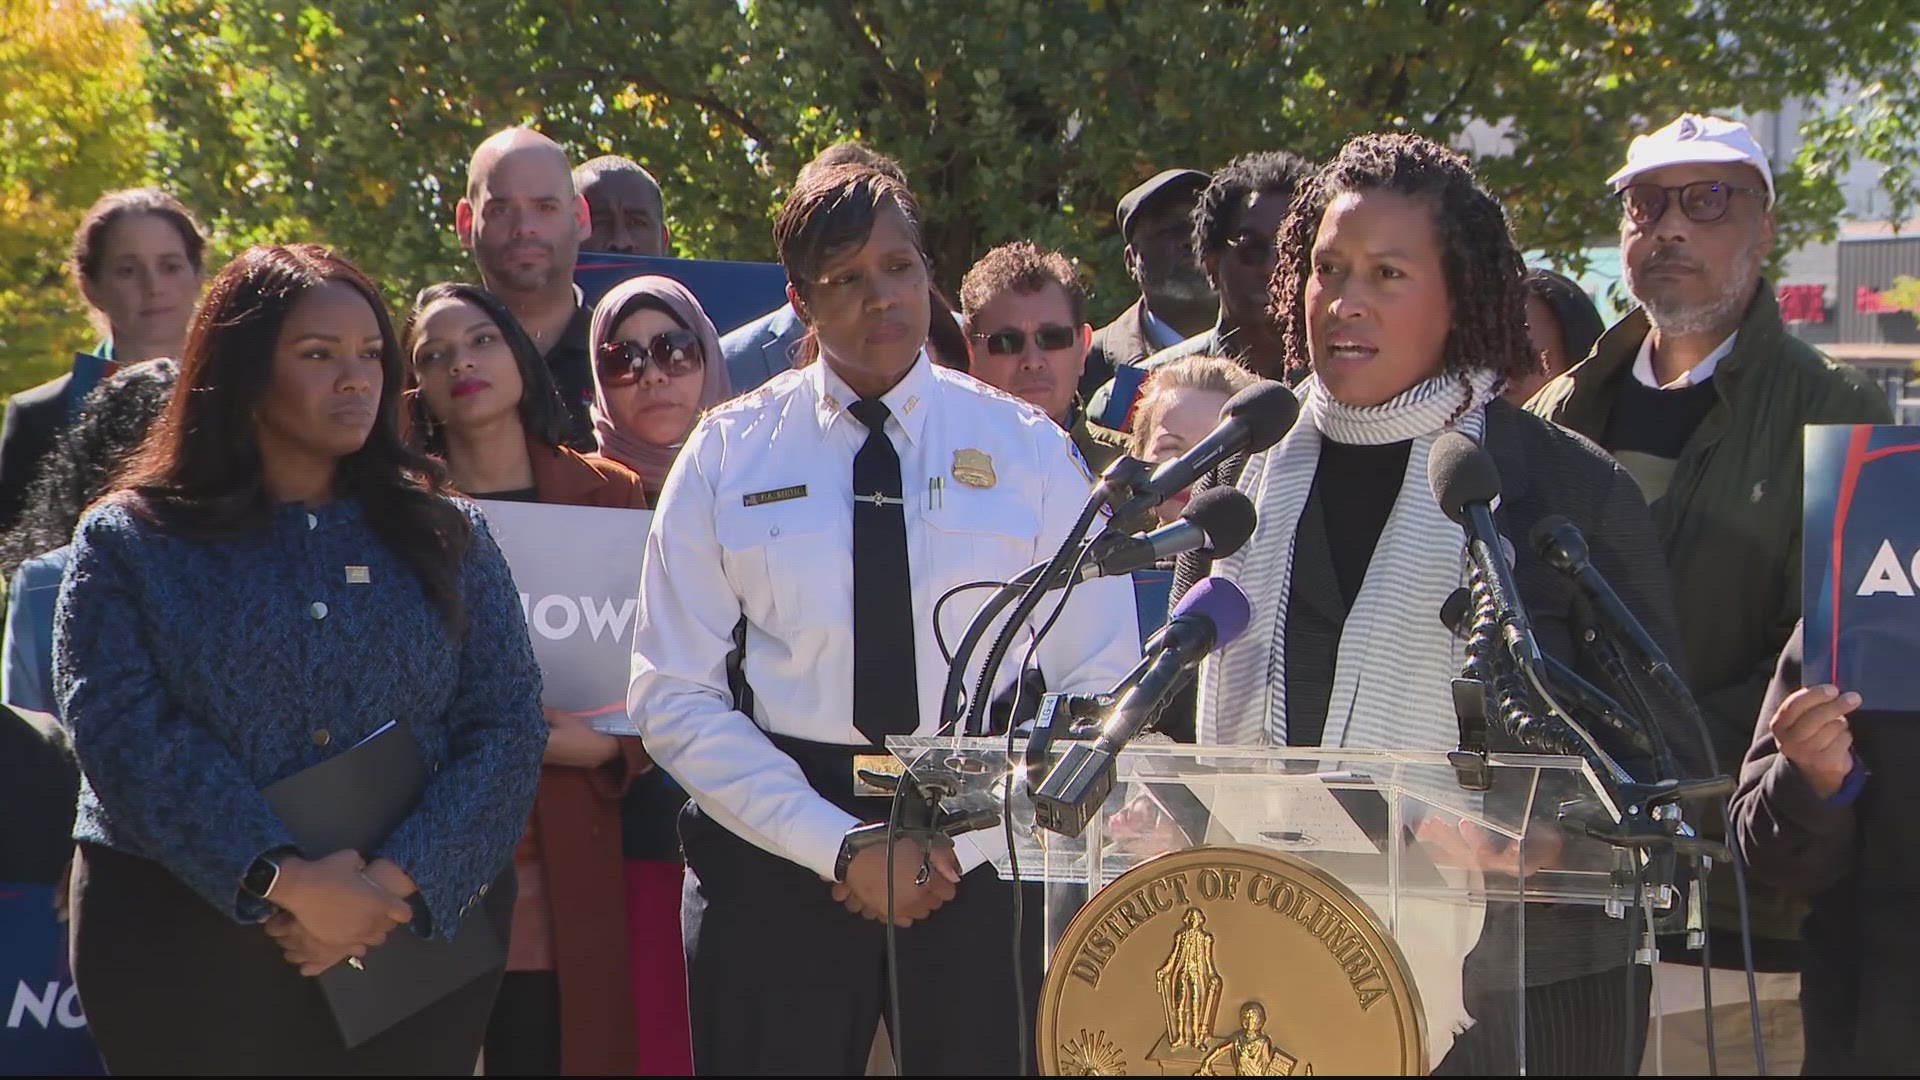 Crime in D.C. continues to rise. Now, D.C. Mayor Muriel Bowser is introducing new legislation to try to fight it. It comes as community leaders have been calling for